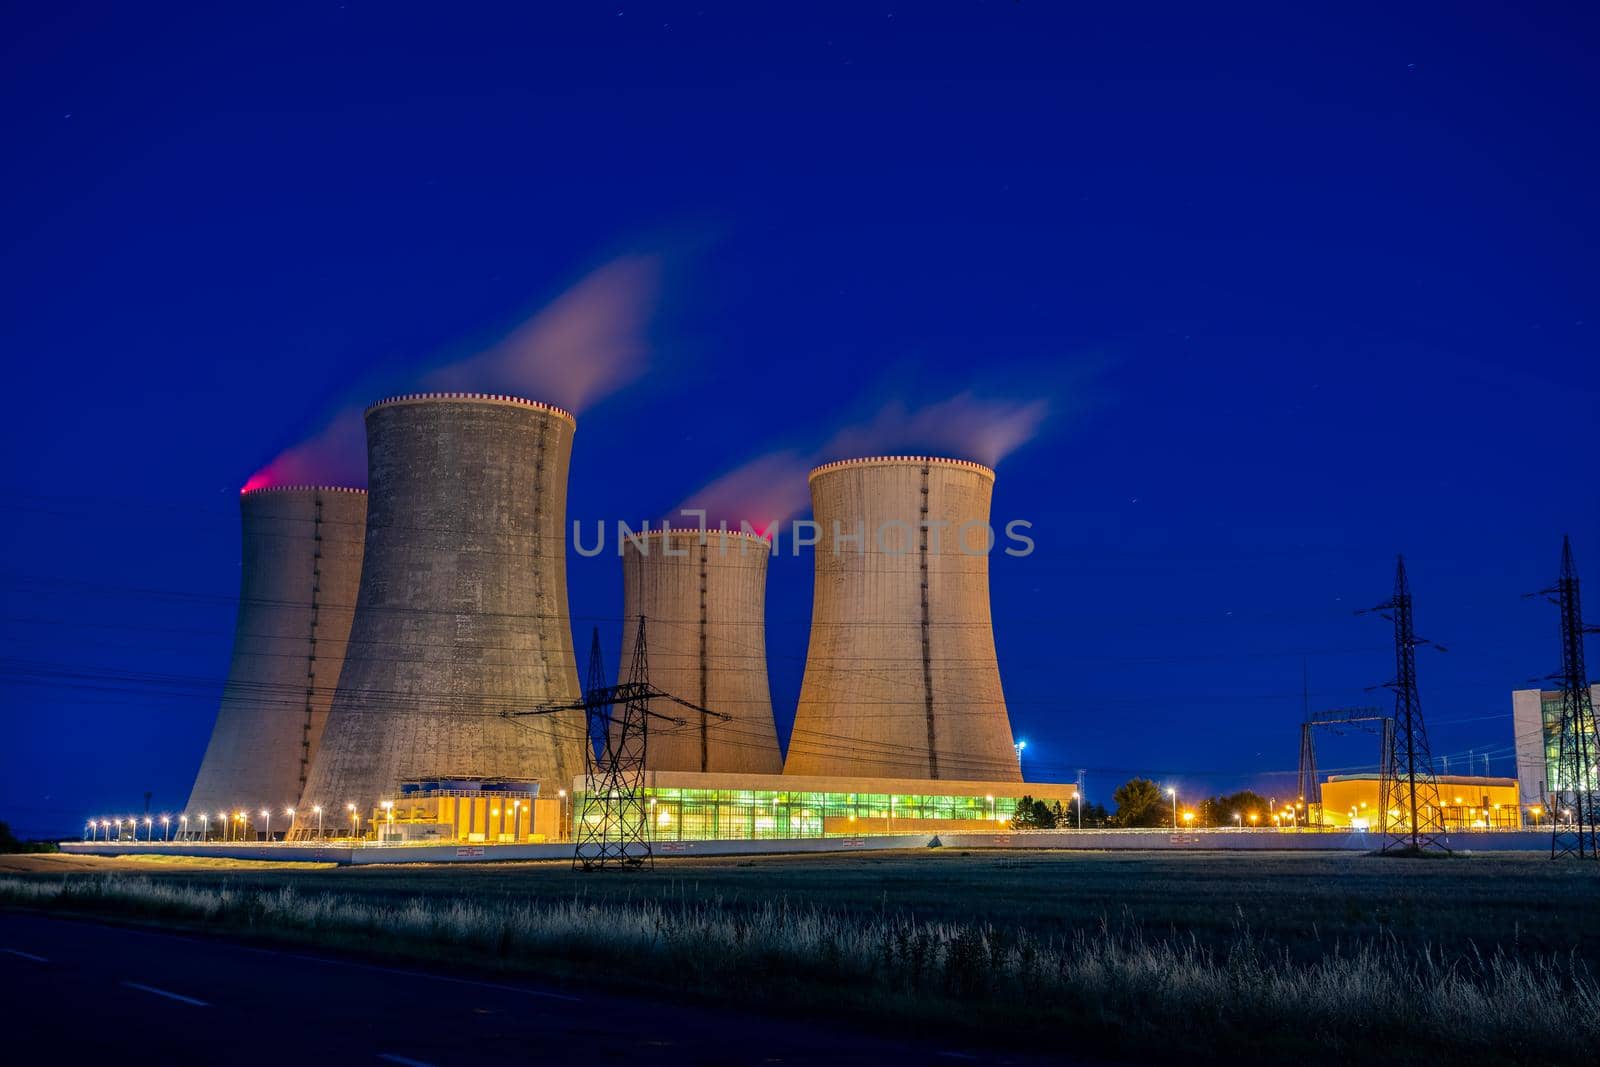 Nuclear Power Station At Night, Dukovany, Czech Republic by artush